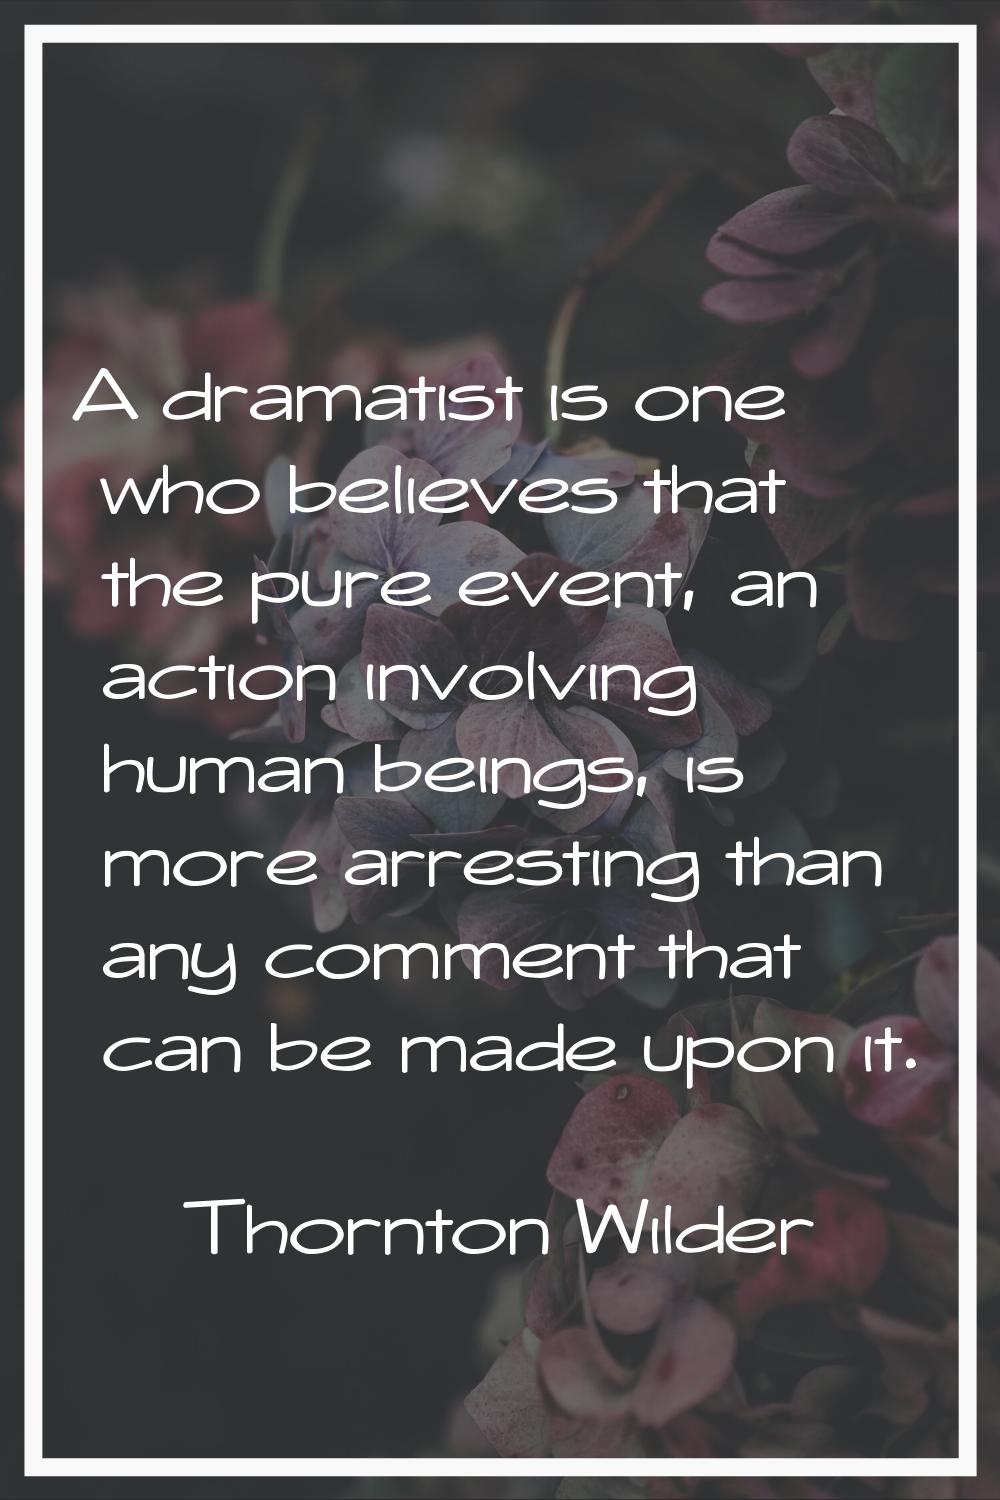 A dramatist is one who believes that the pure event, an action involving human beings, is more arre